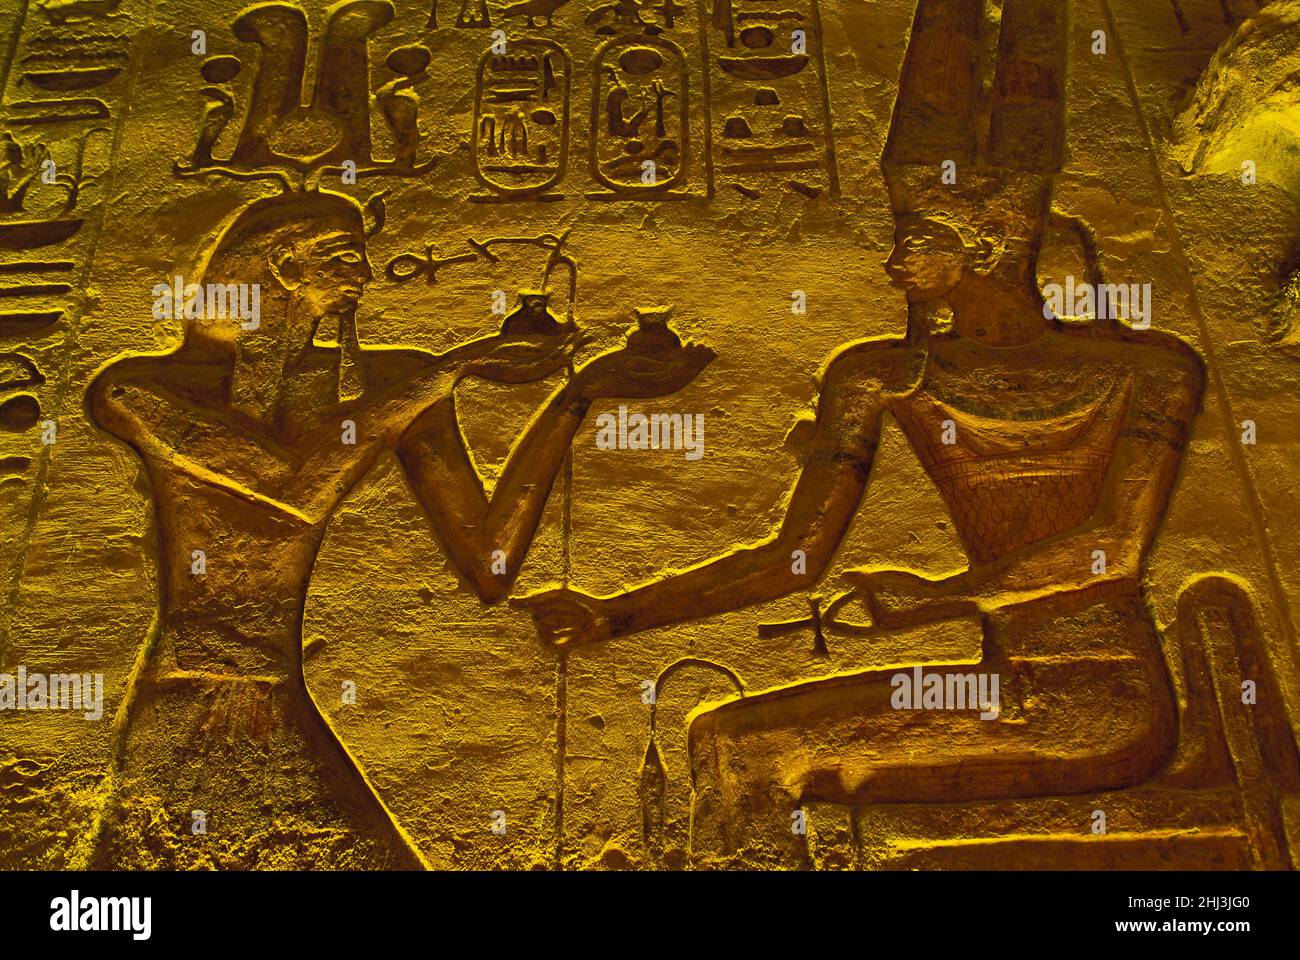 Reliefs inside the Great Temple of Ramesses II, Abu Simbel, Egypt Stock Photo